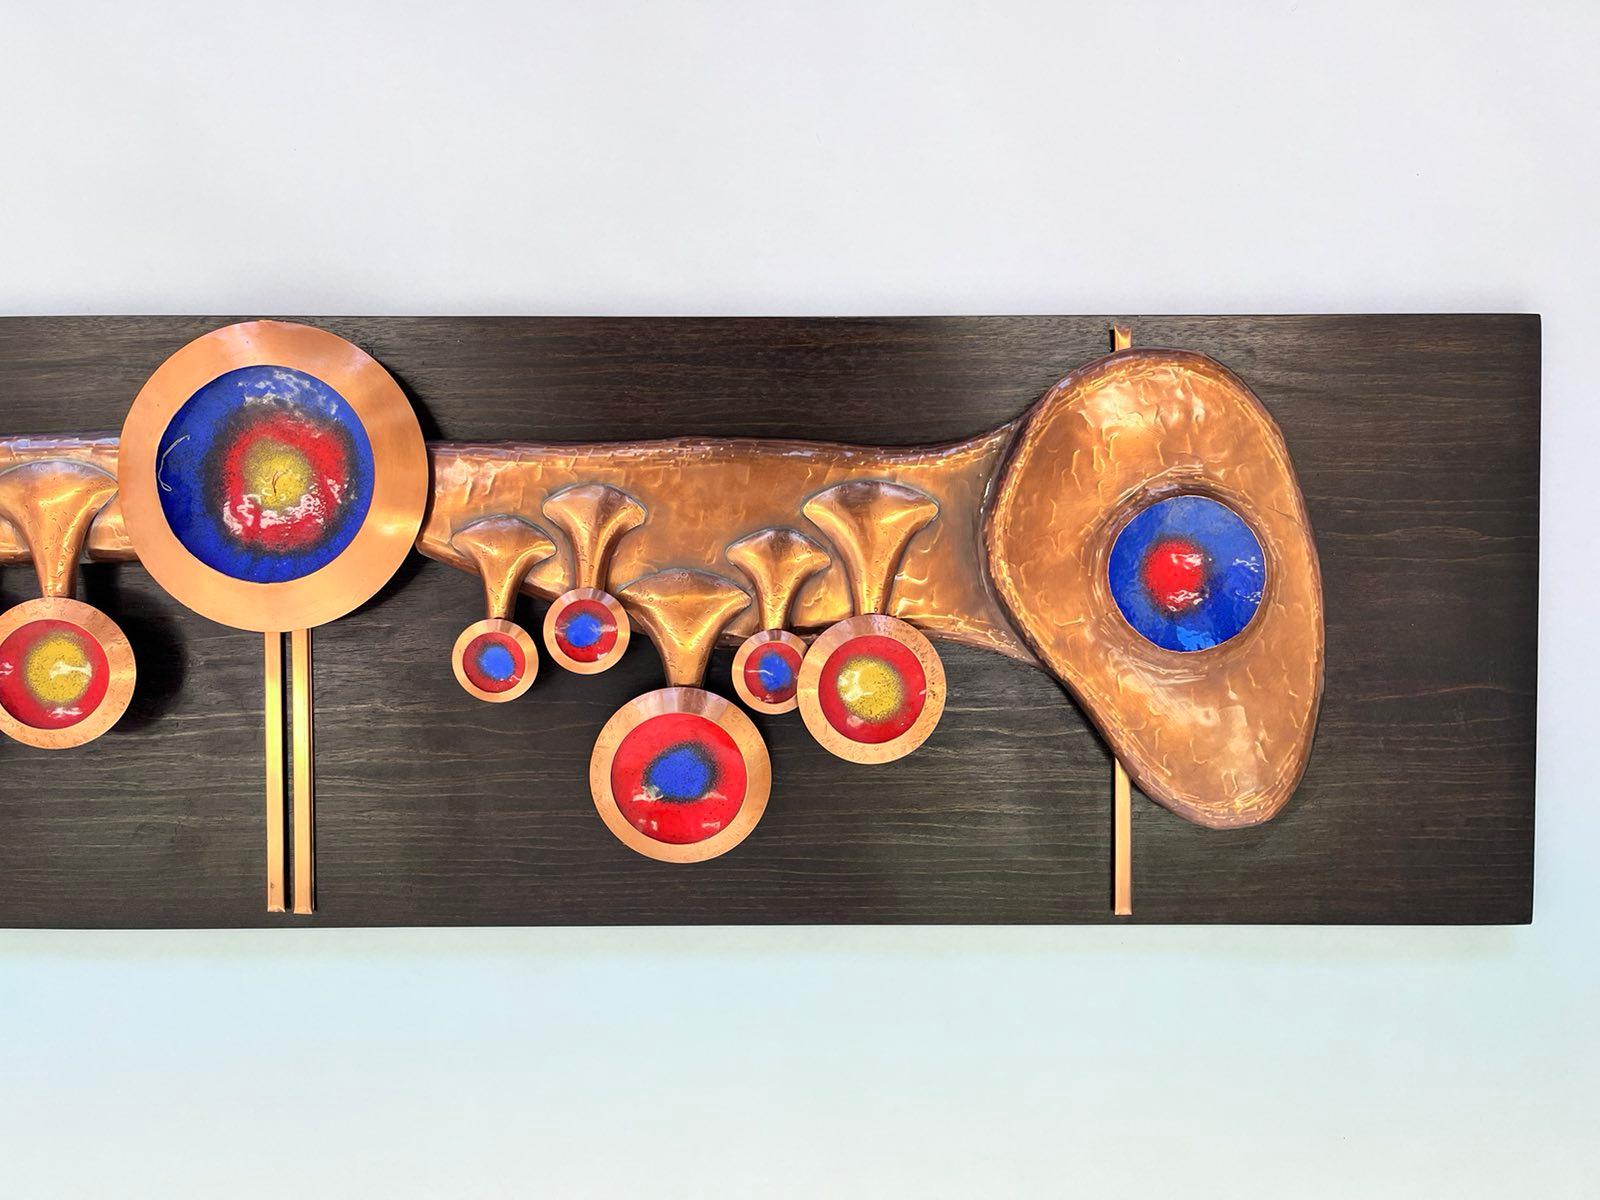 Monumental Unique Midcentury Brass / Copper Wall Sculpture, Germany, 1970s  For Sale 1